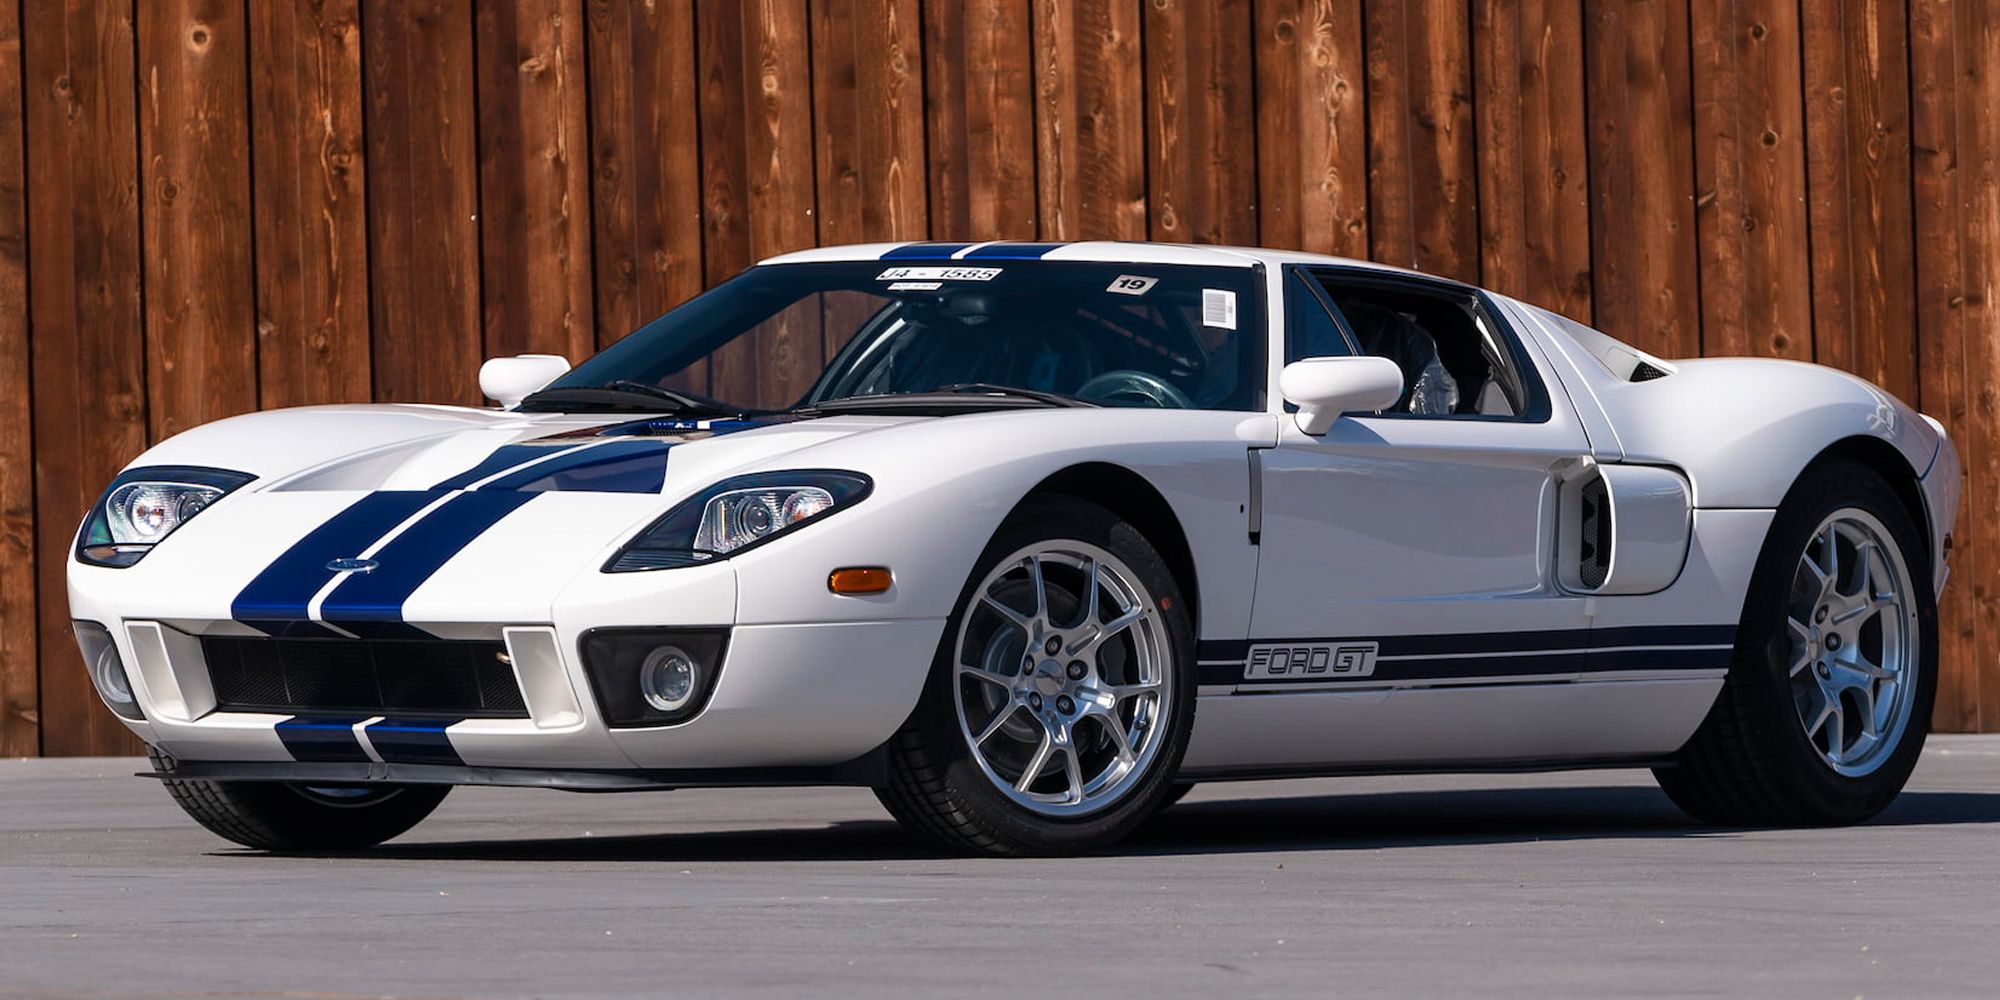 The front of the 2005 Ford GT